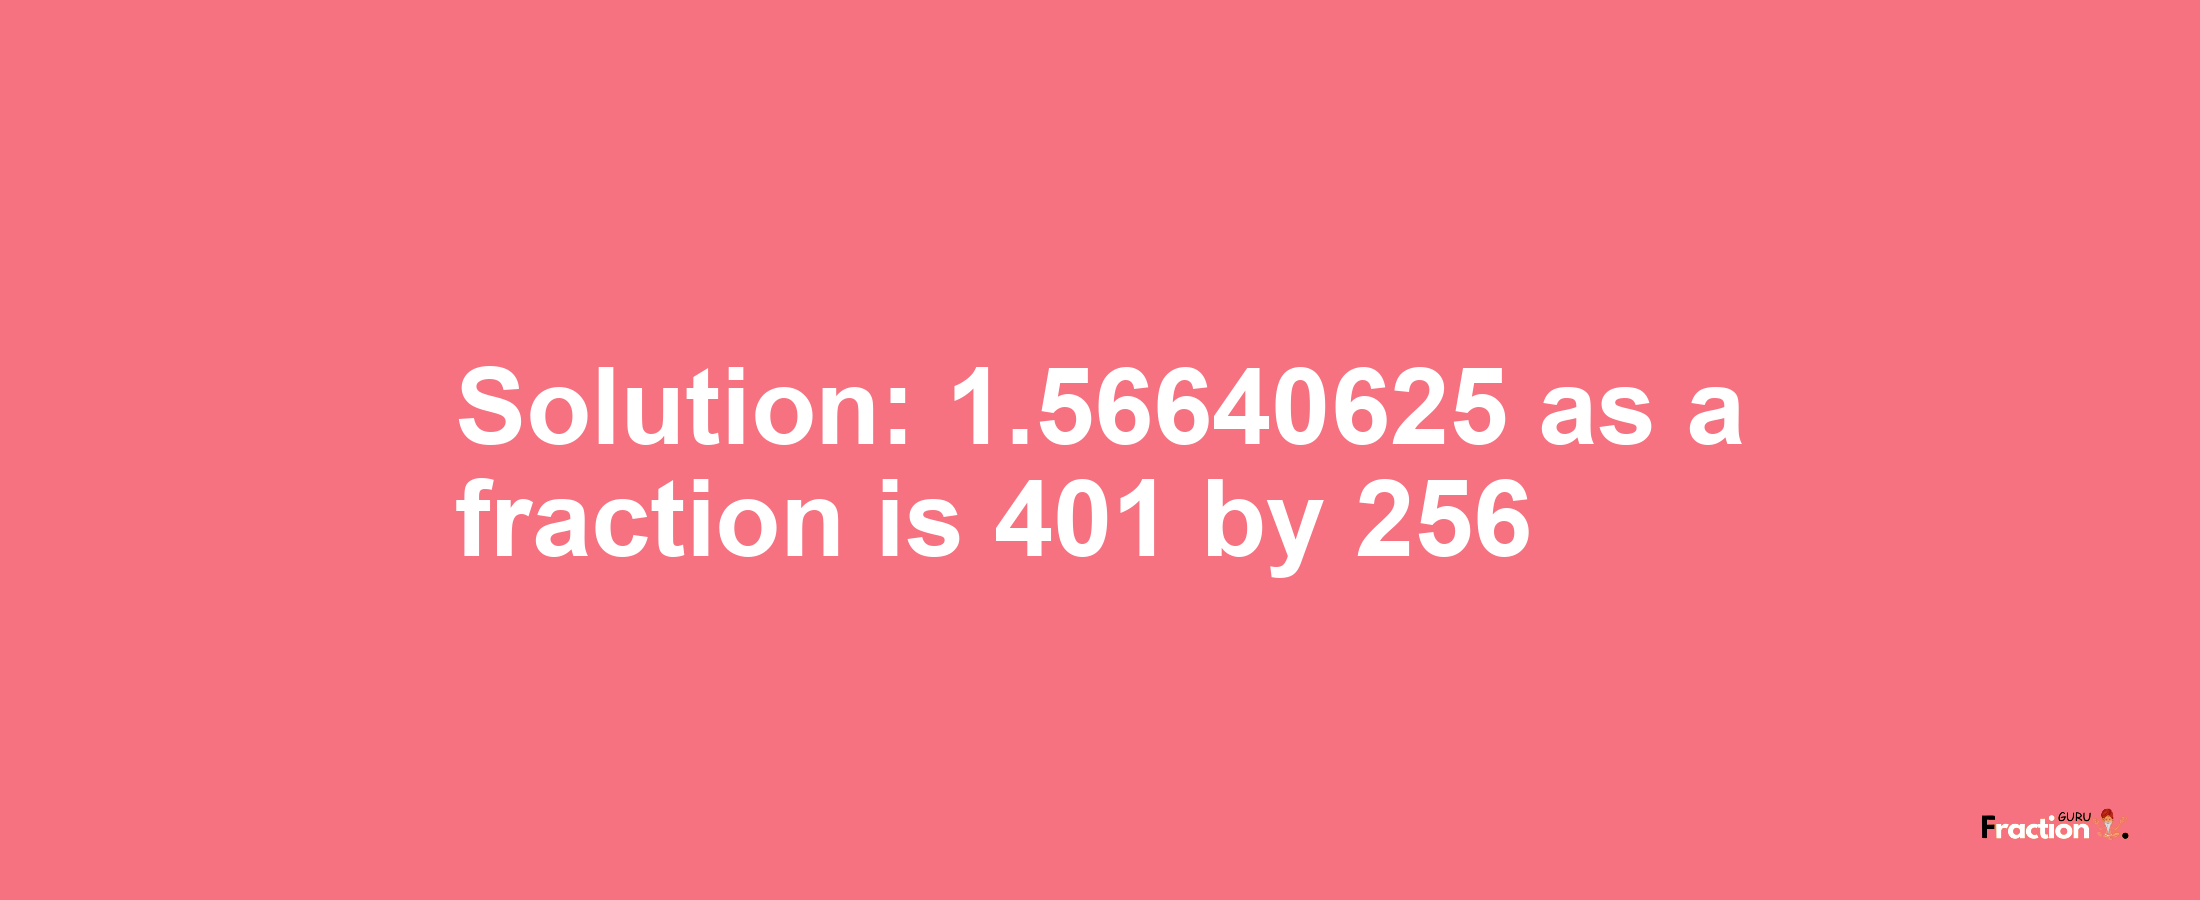 Solution:1.56640625 as a fraction is 401/256